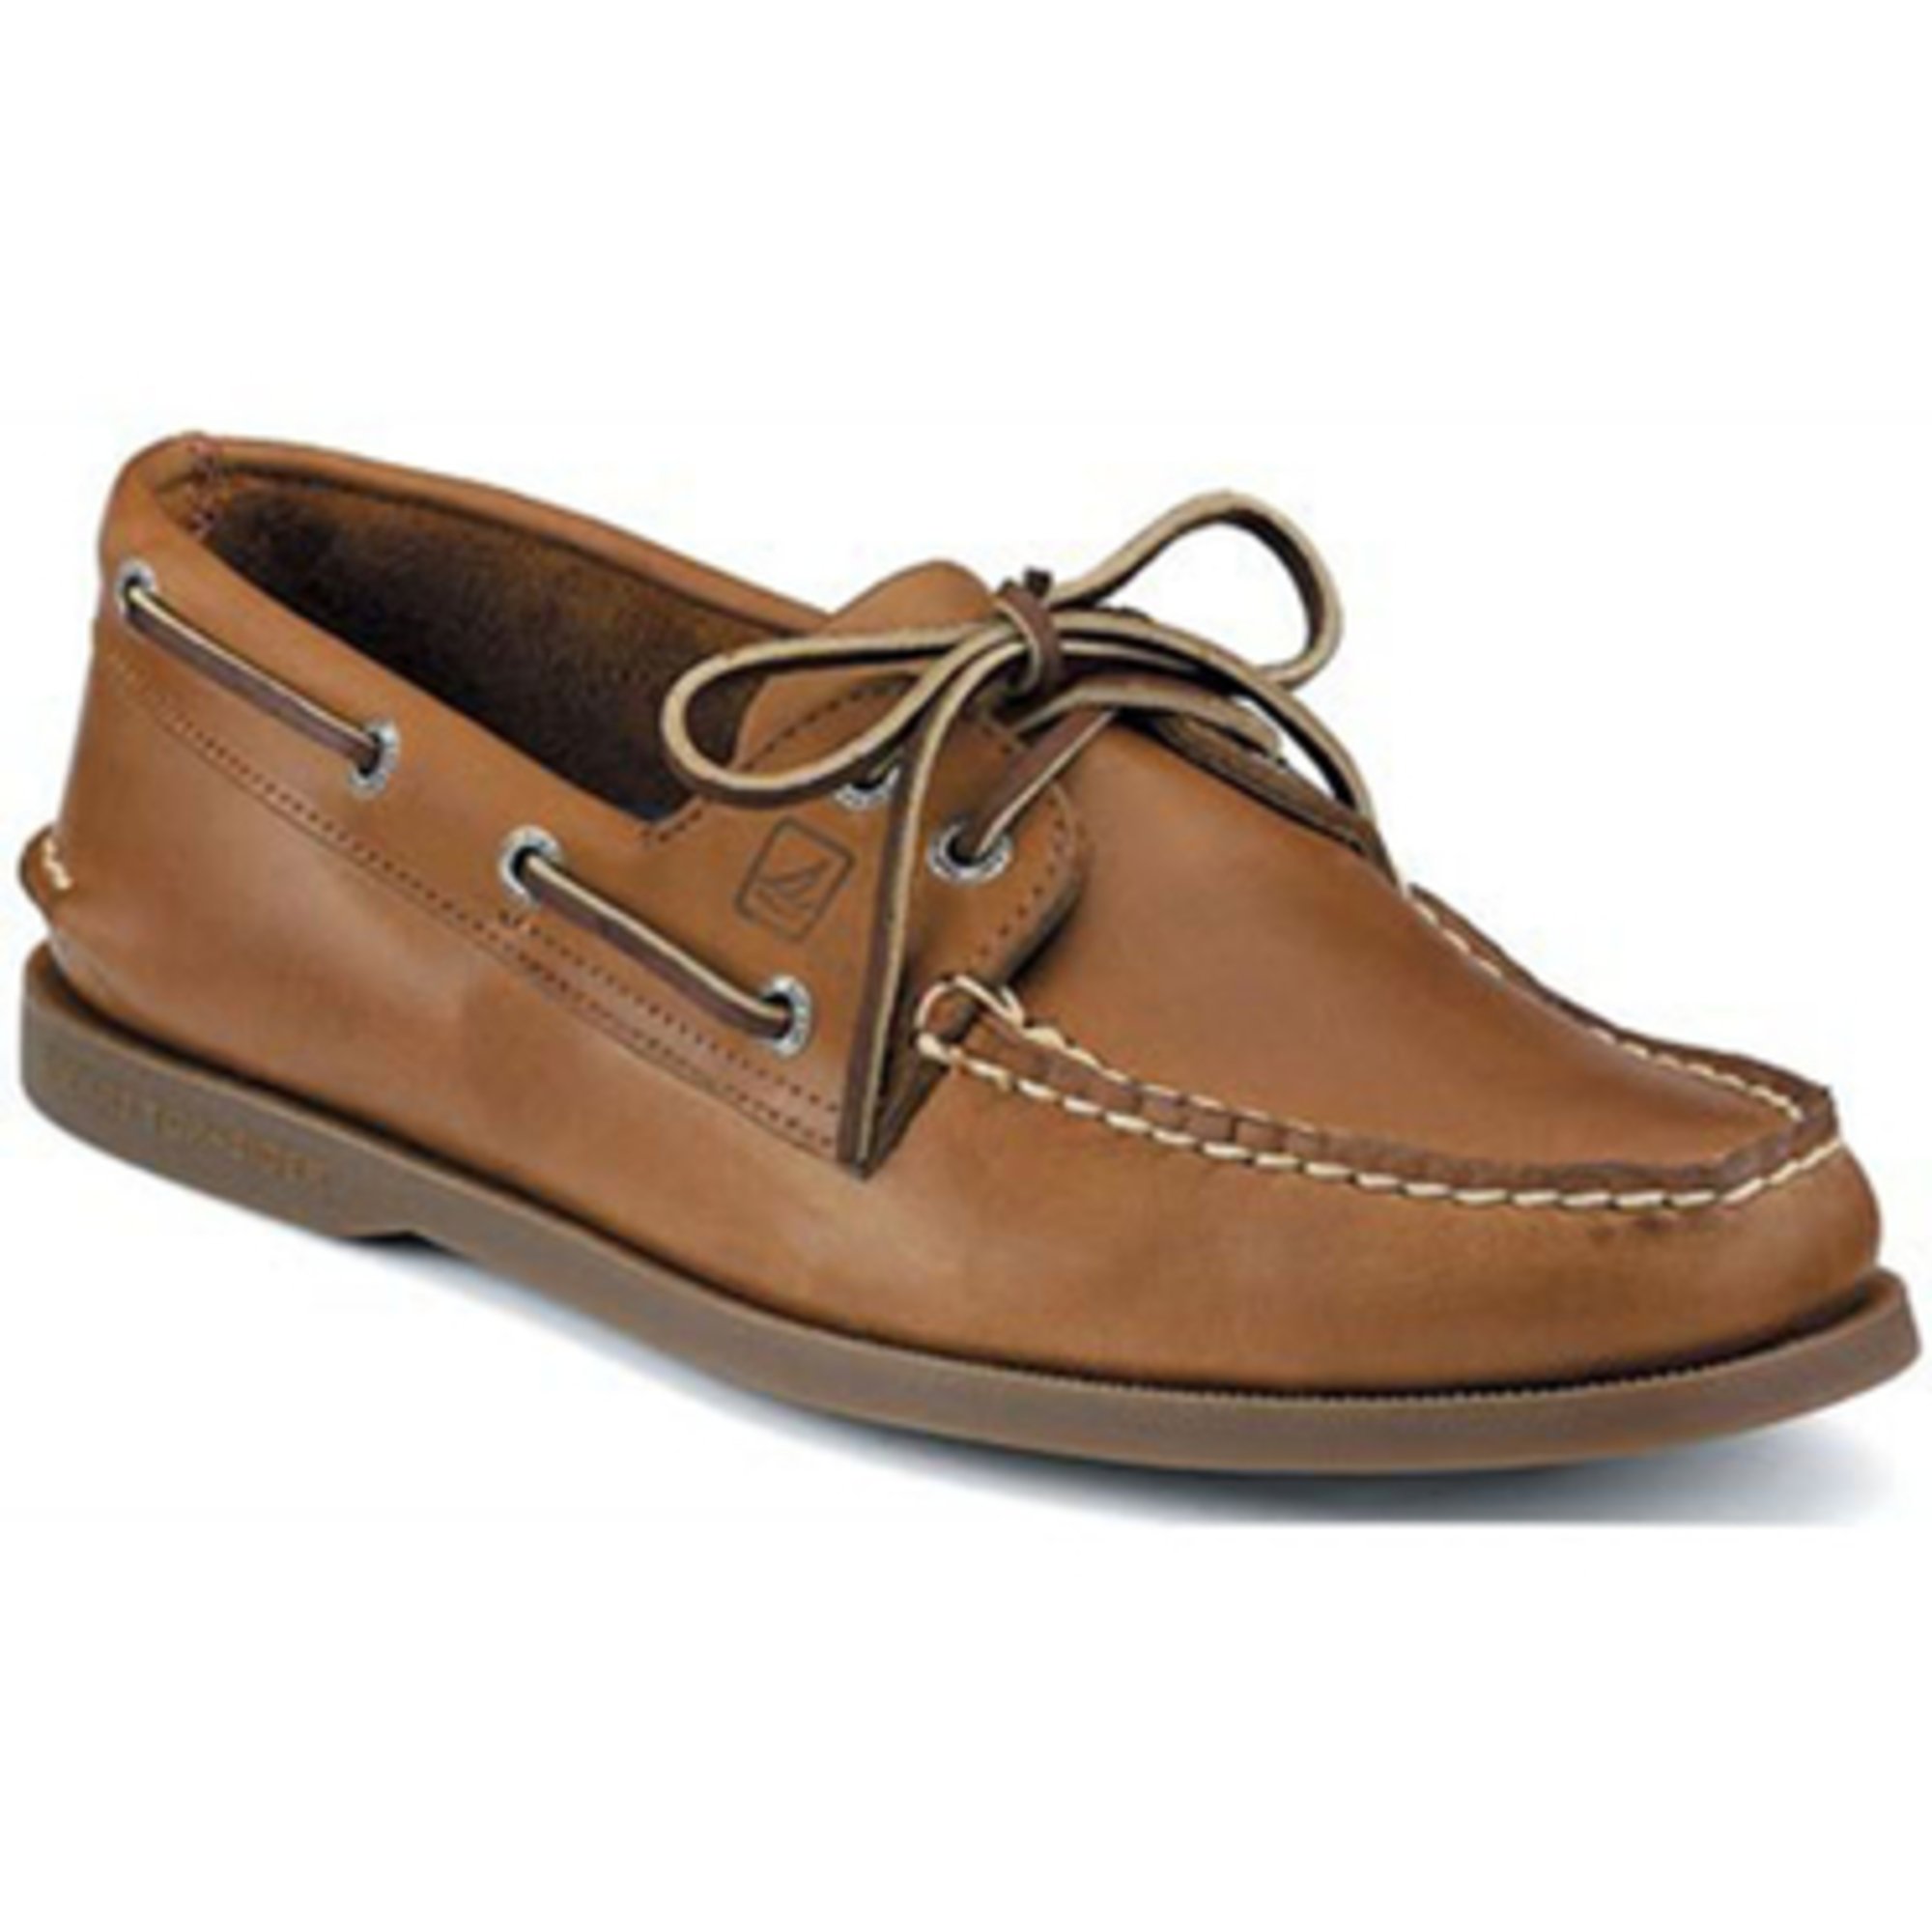 sperry casual boots